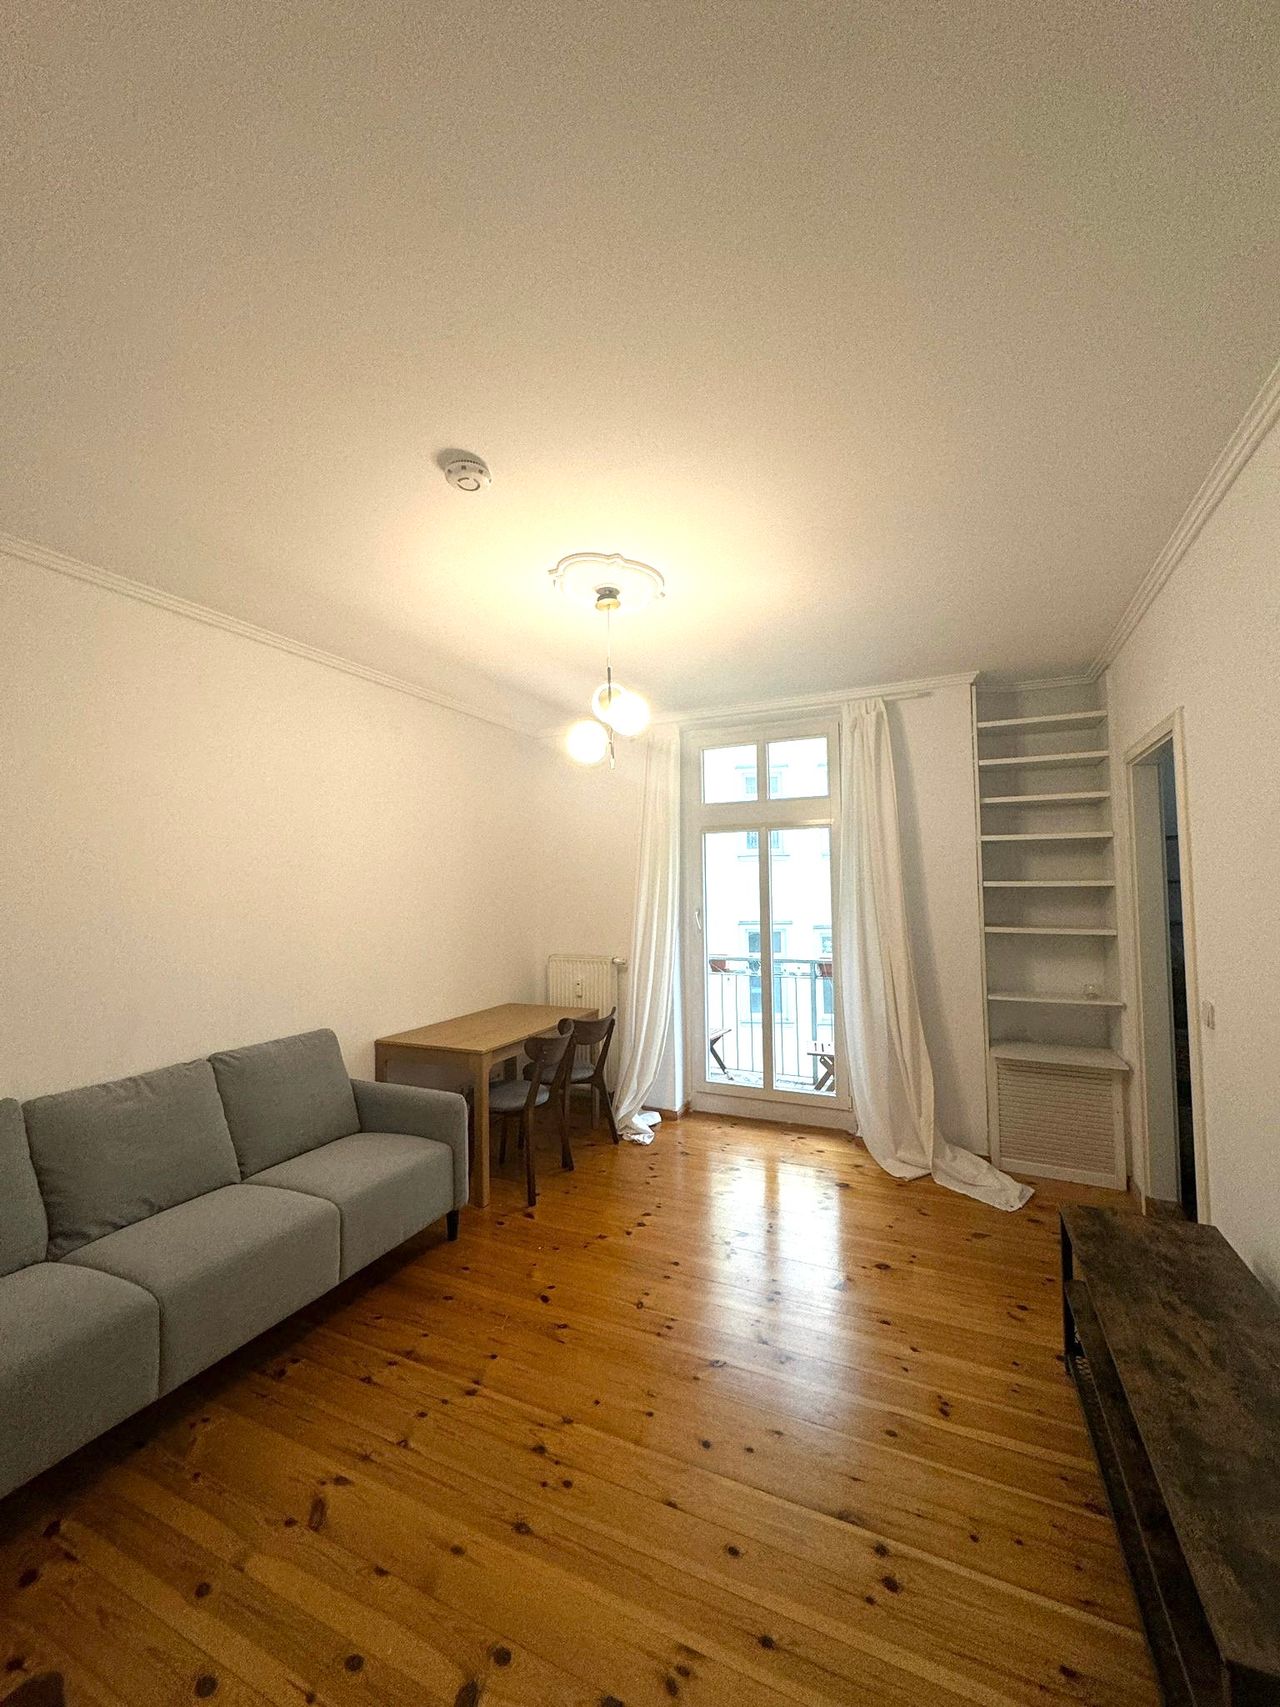 2-bedroom apartment (50m2) in central Berlin Prenzlauer Berg fully furnished